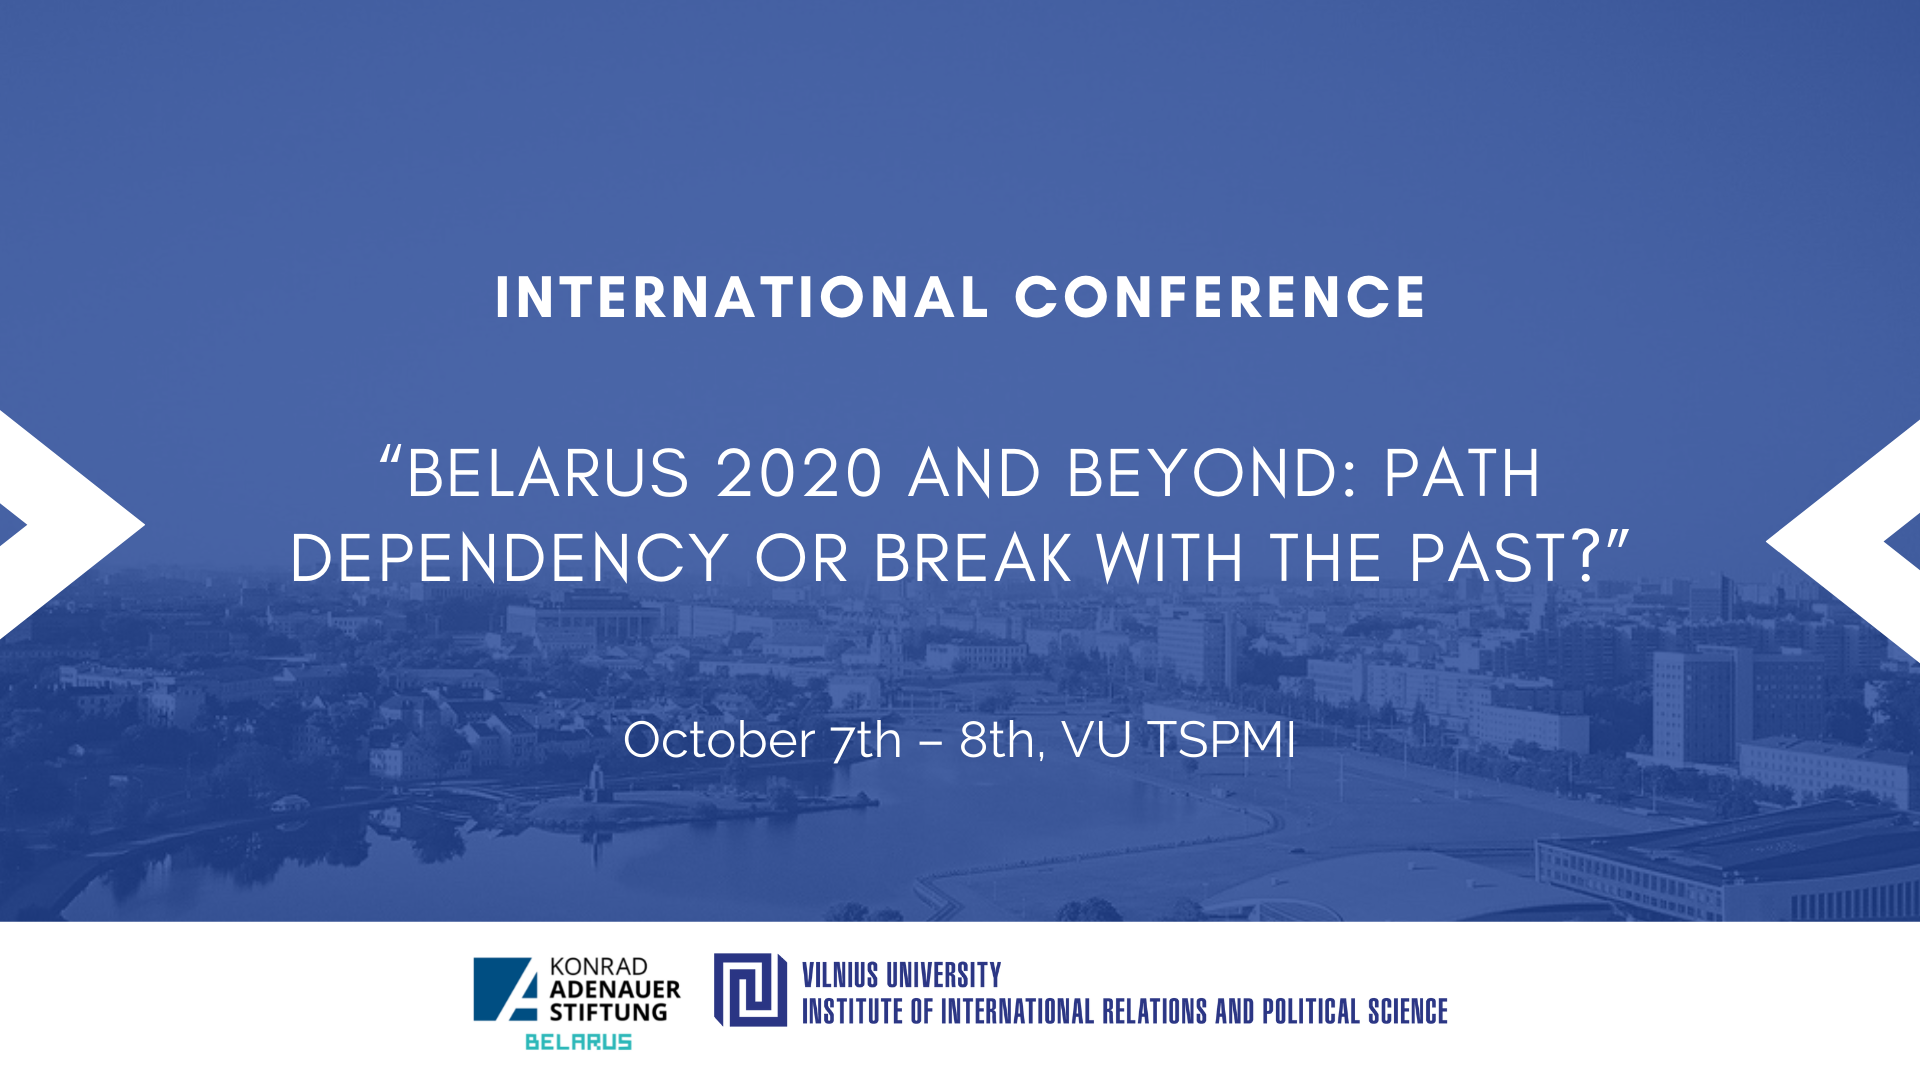 International Conference “Belarus 2020 and beyond: Path Dependency or Break with the Past?”